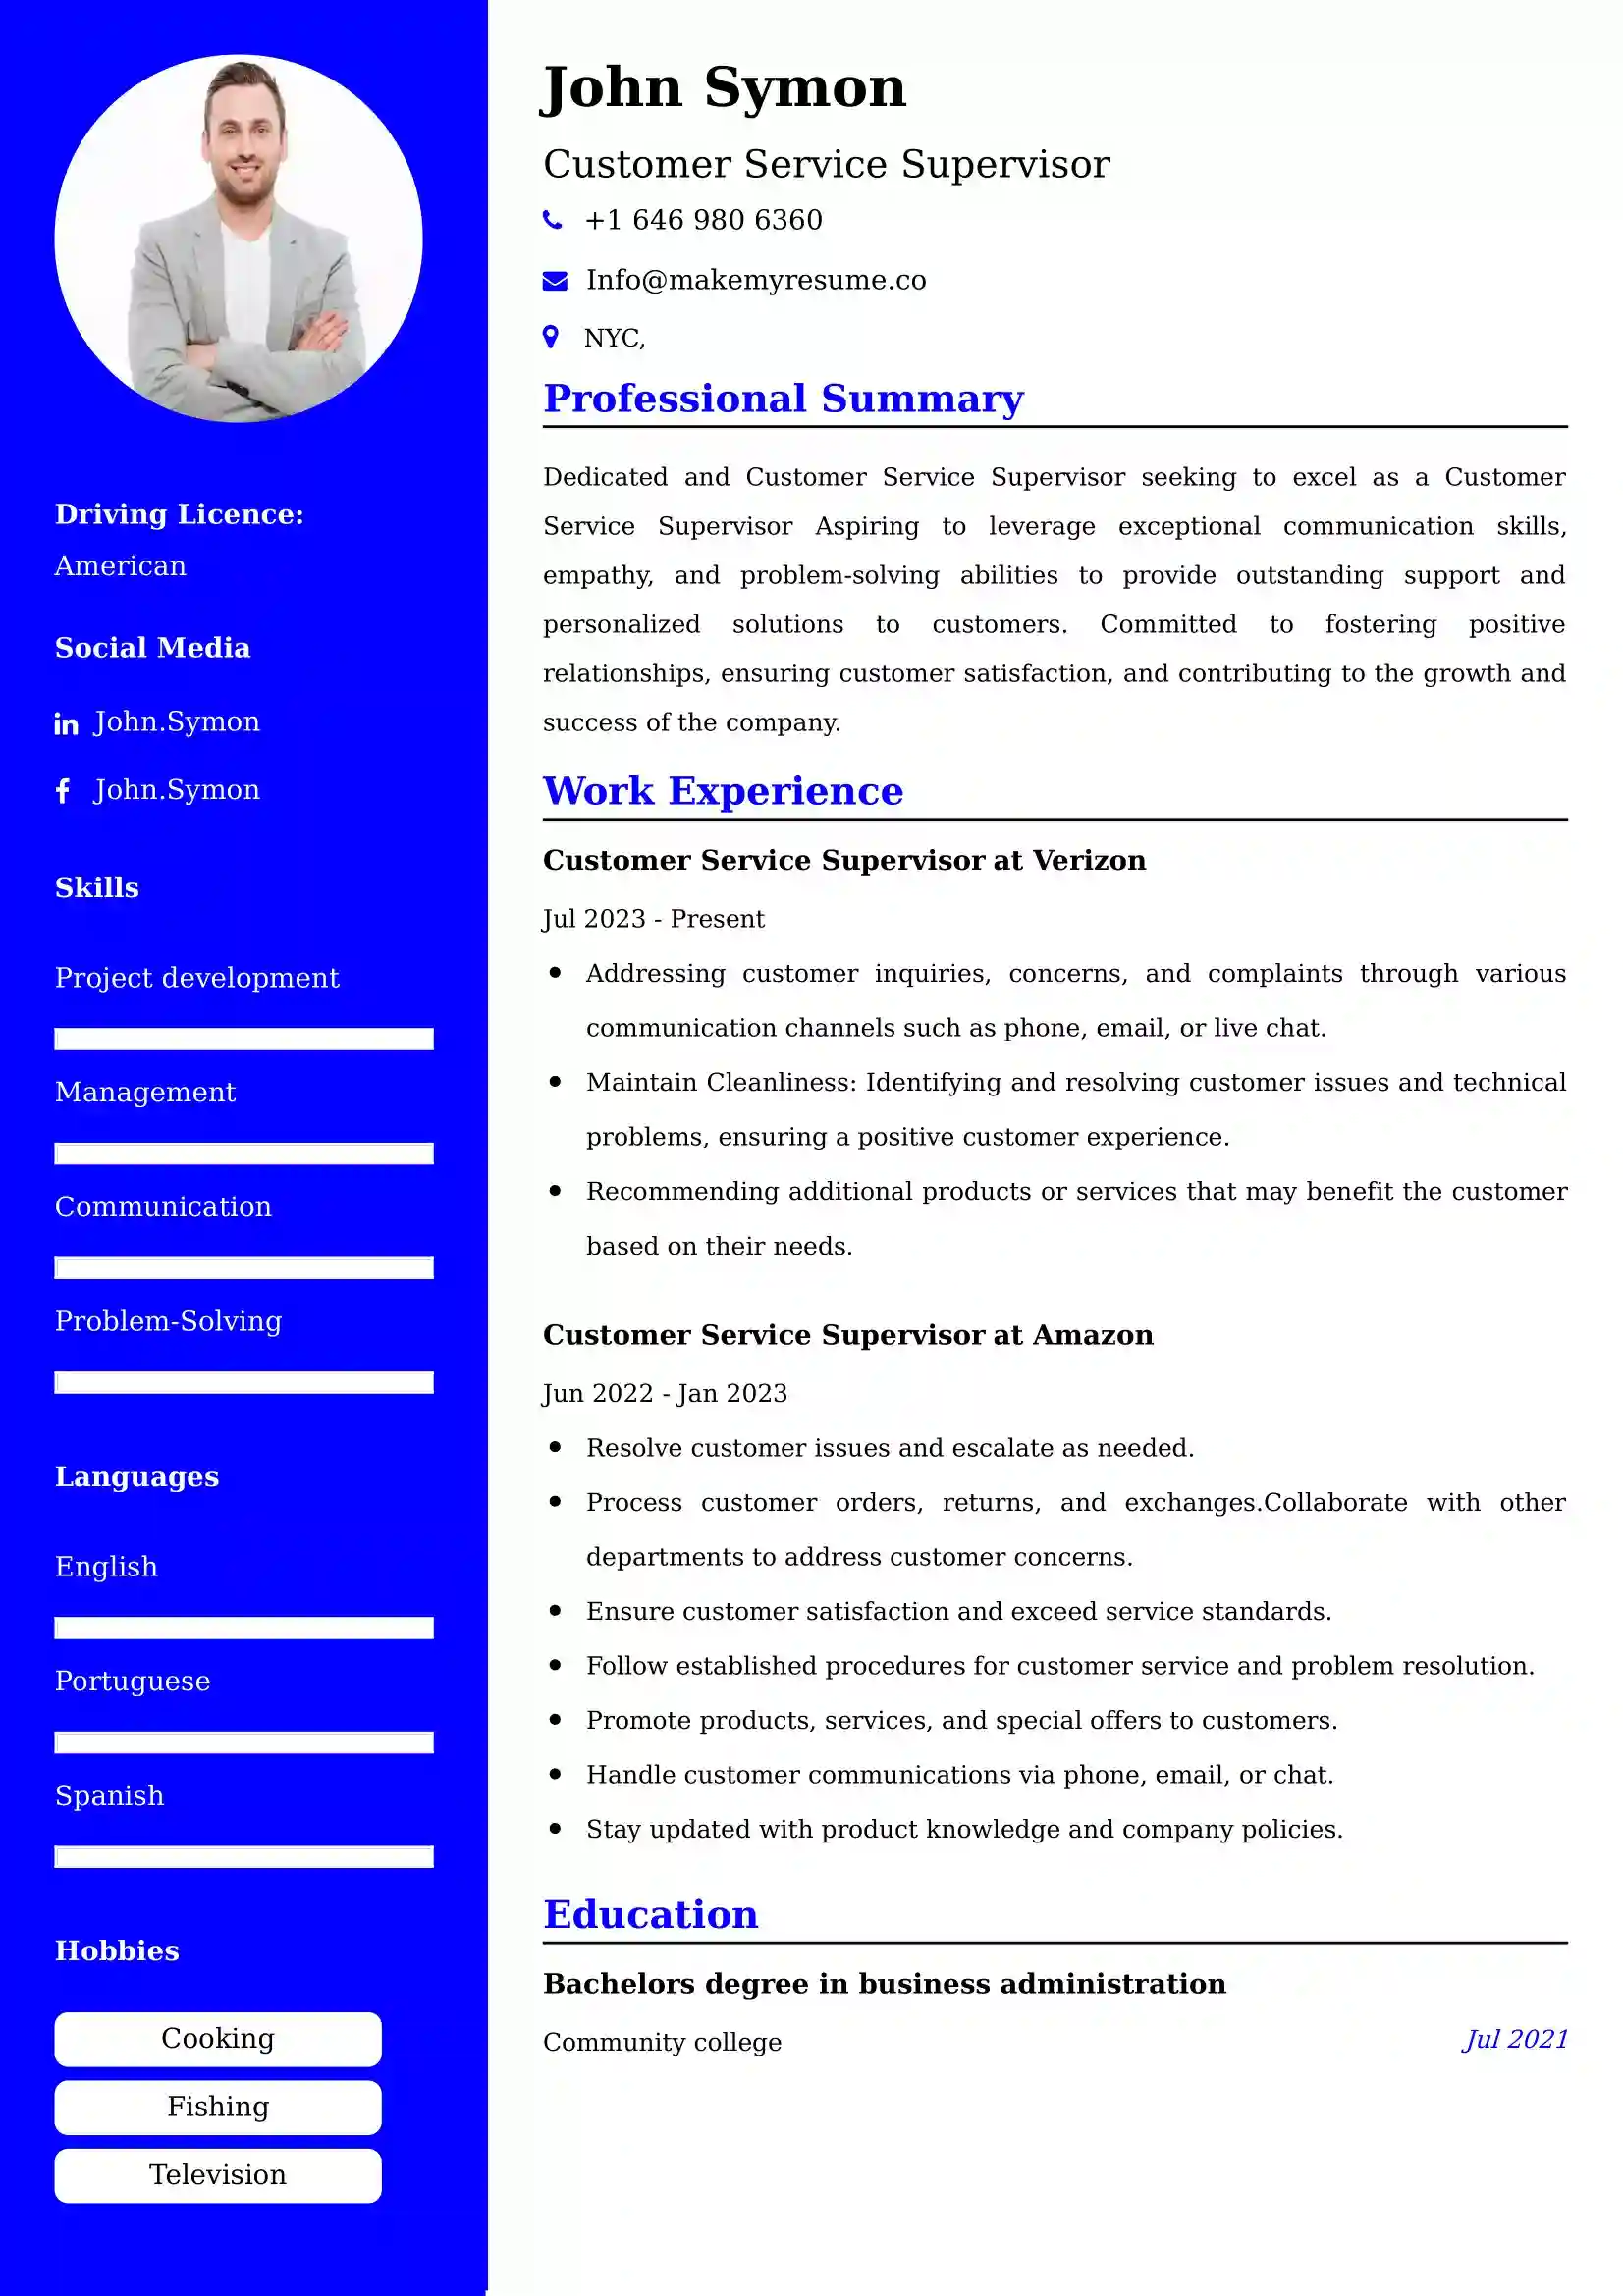 Customer Service Supervisor Resume Examples - UAE Format and Tips.